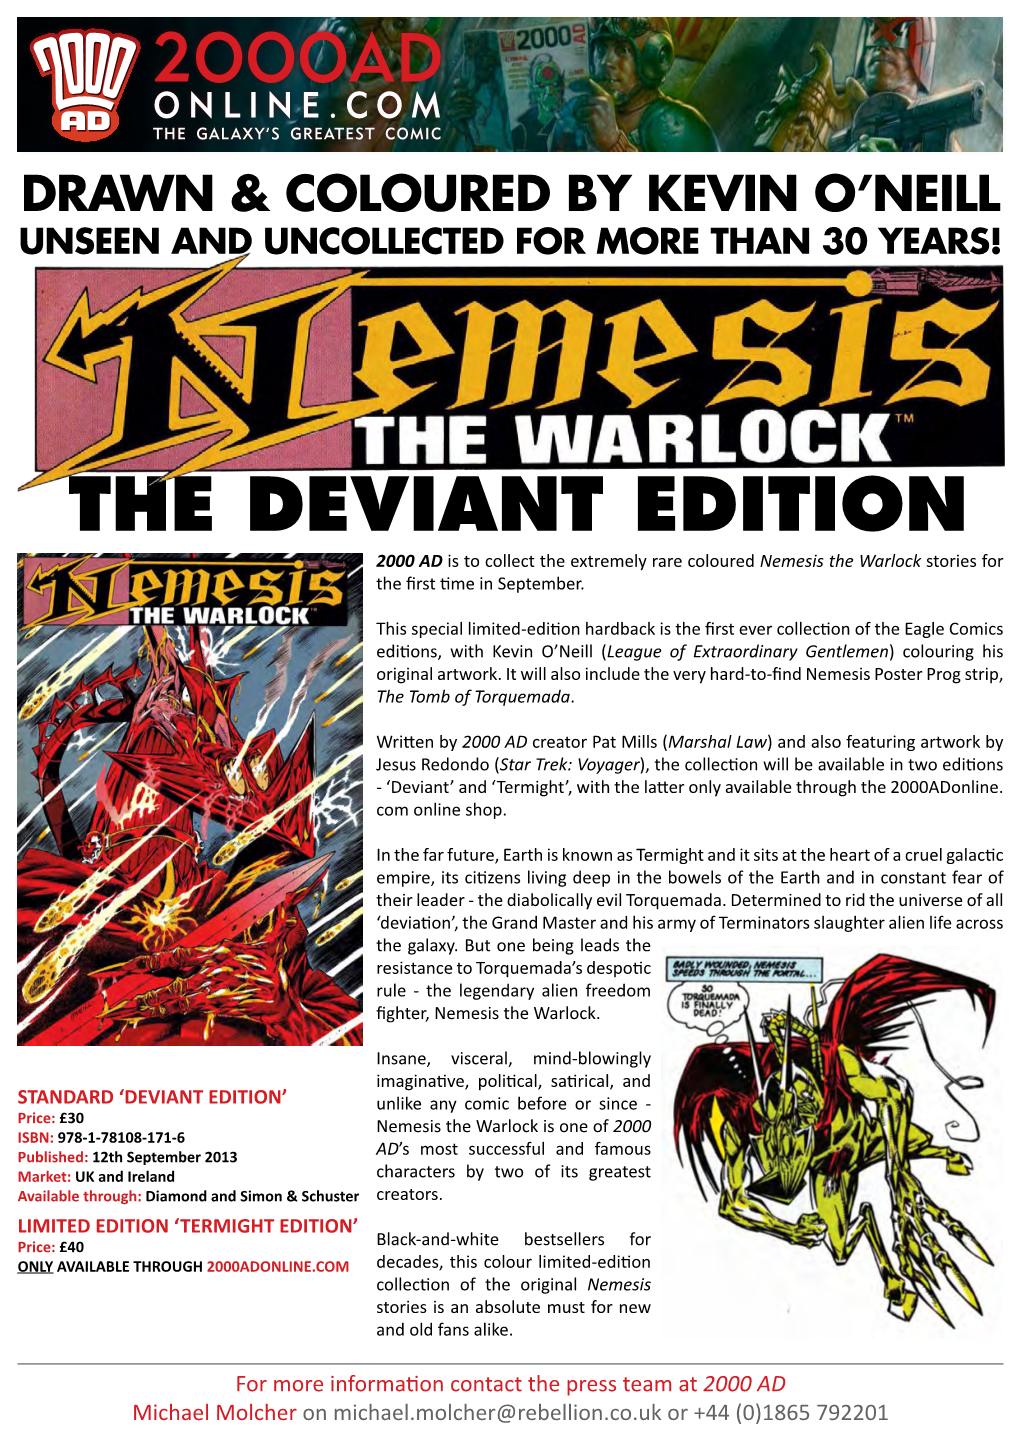 THE DEVIANT EDITION 2000 AD Is to Collect the Extremely Rare Coloured Nemesis the Warlock Stories for the First Time in September